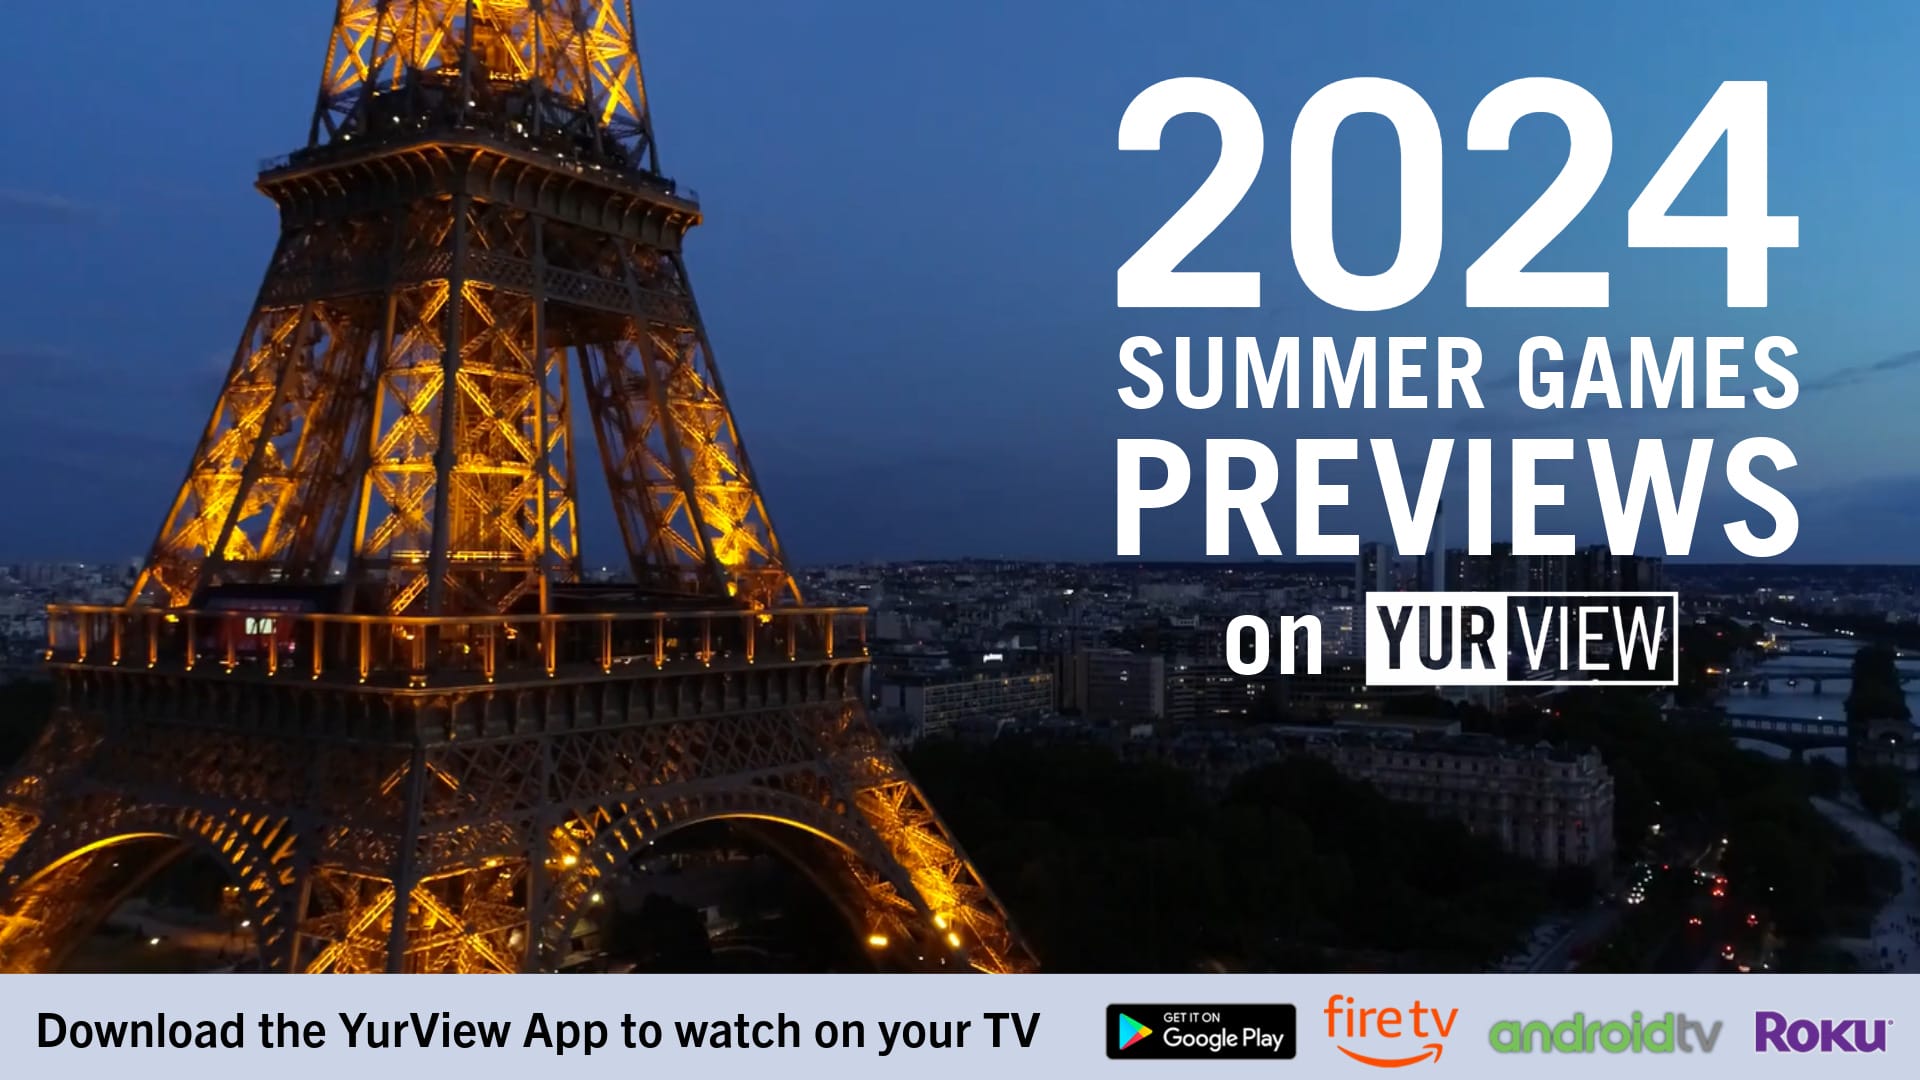 2024 Summer Games Previews on YurView